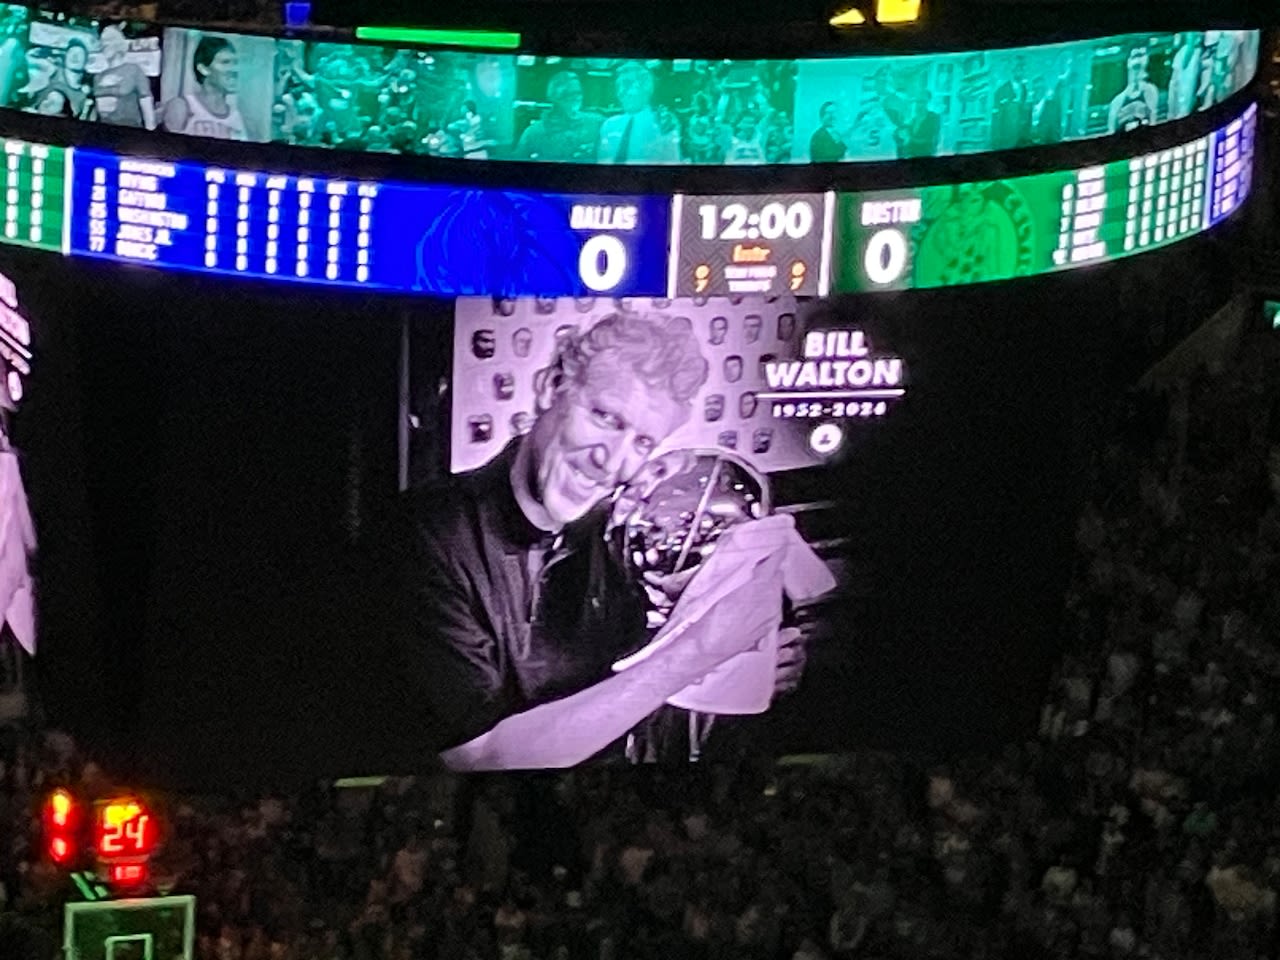 Celtics pay tribute to late great Bill Walton before Game 1